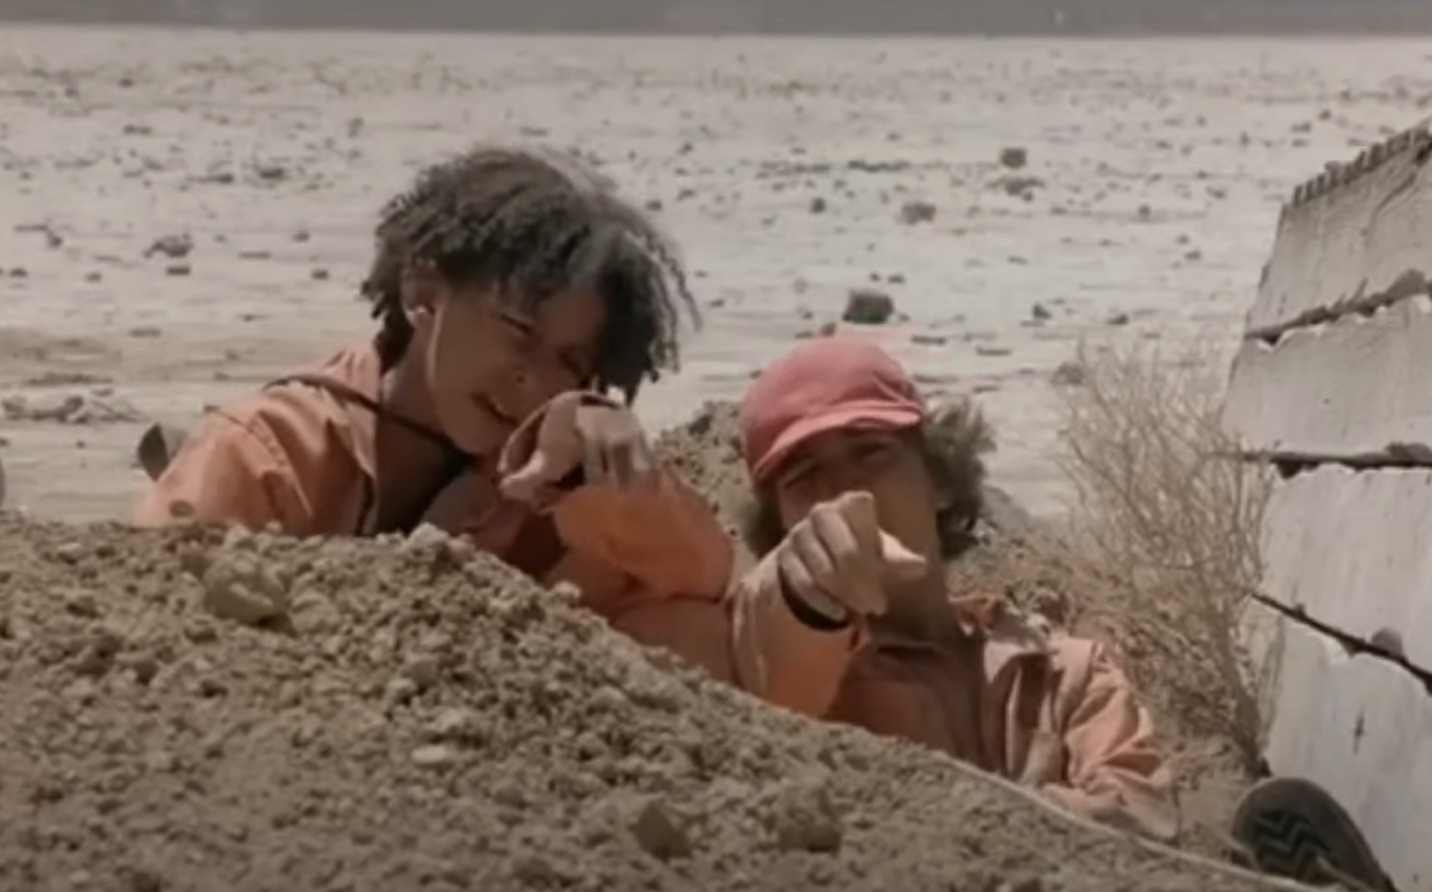 Two characters from the film &quot;Holes&quot; lie on the ground, pointing towards something outside of frame